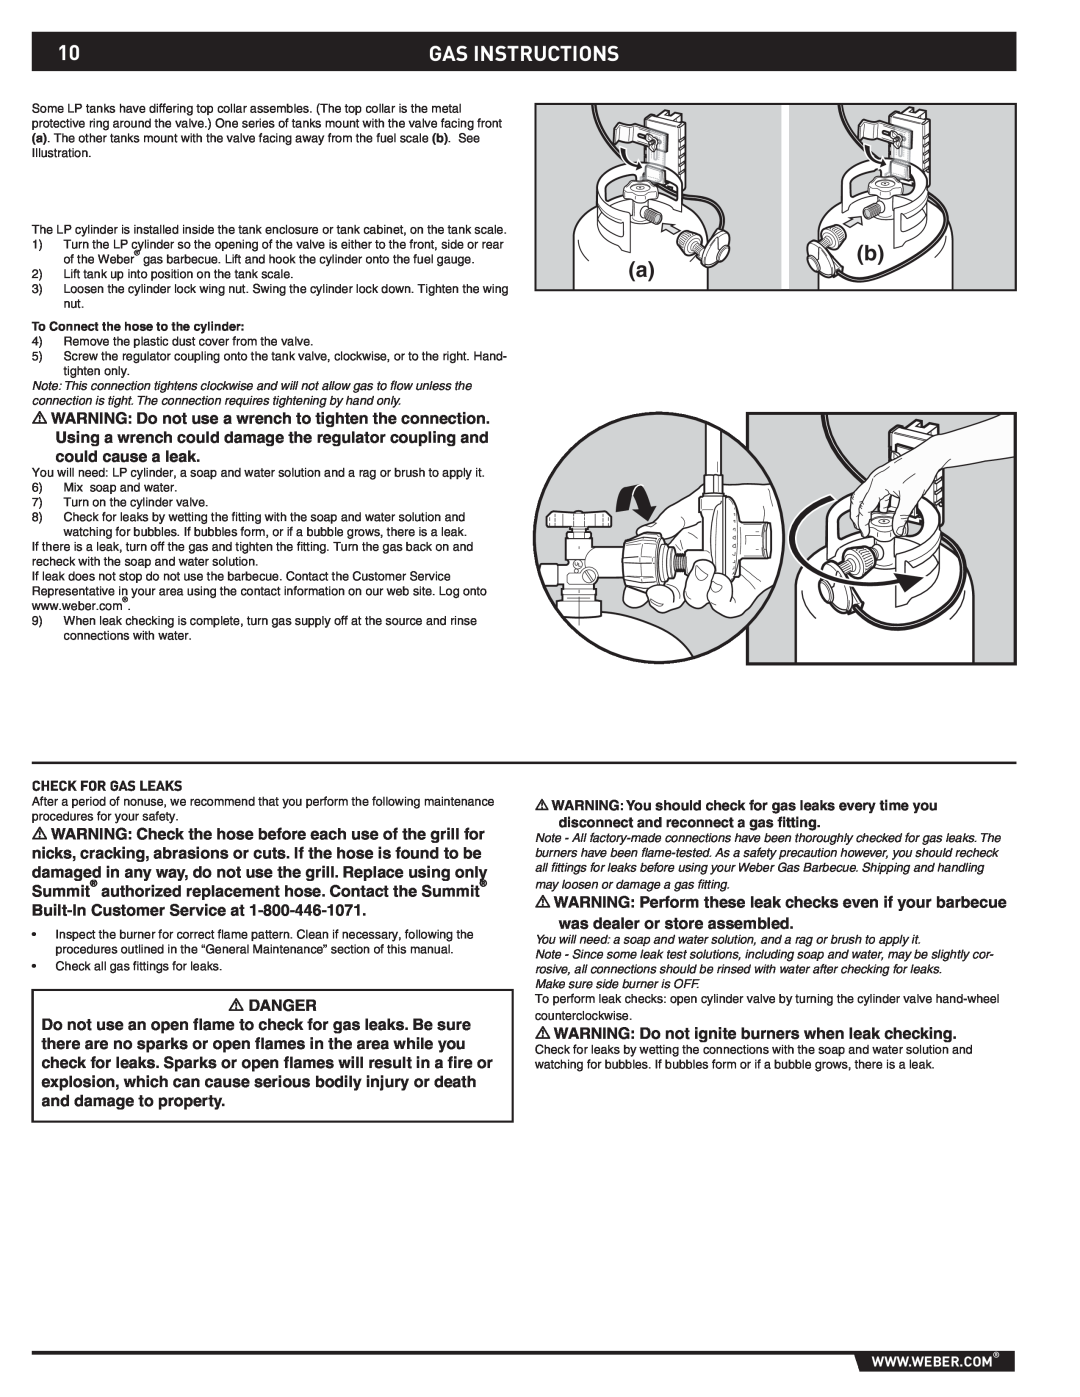 Weber 89796 manual Gas Instructions 